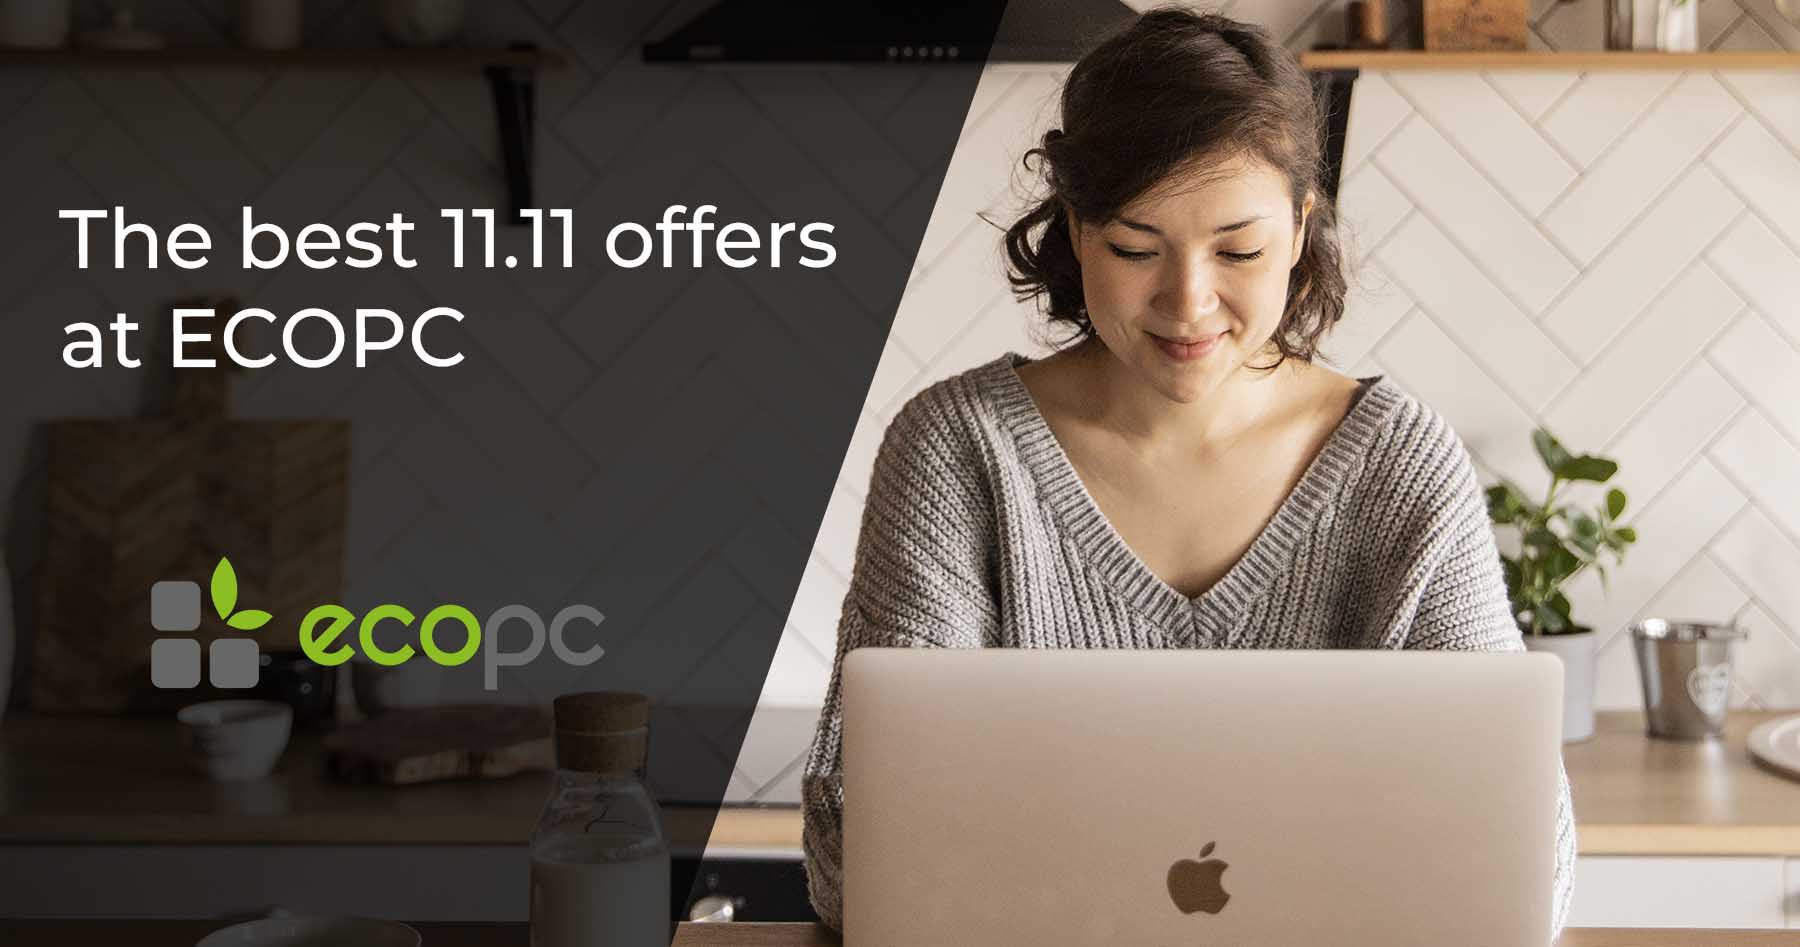 The best 11.11 offers at ECOPC